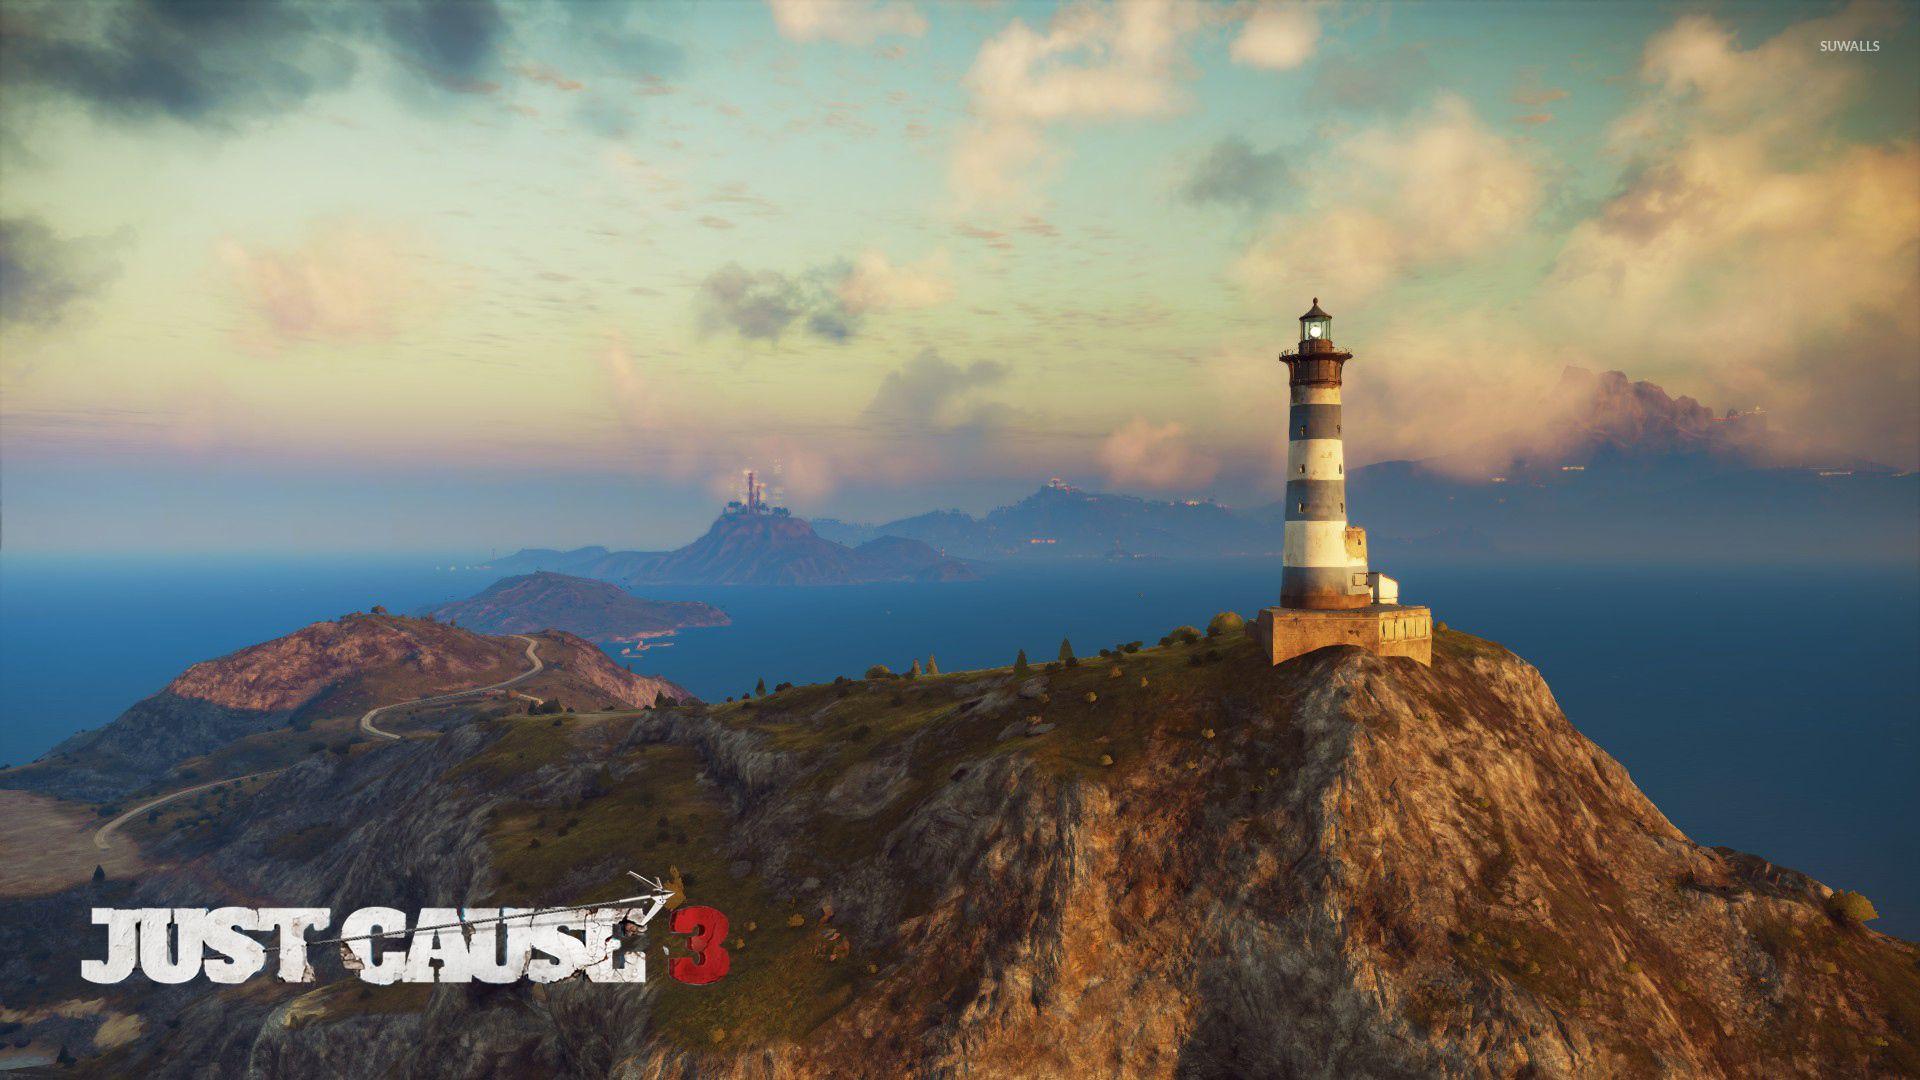 Lighthouse in Medici Cause 3 wallpaper wallpaper